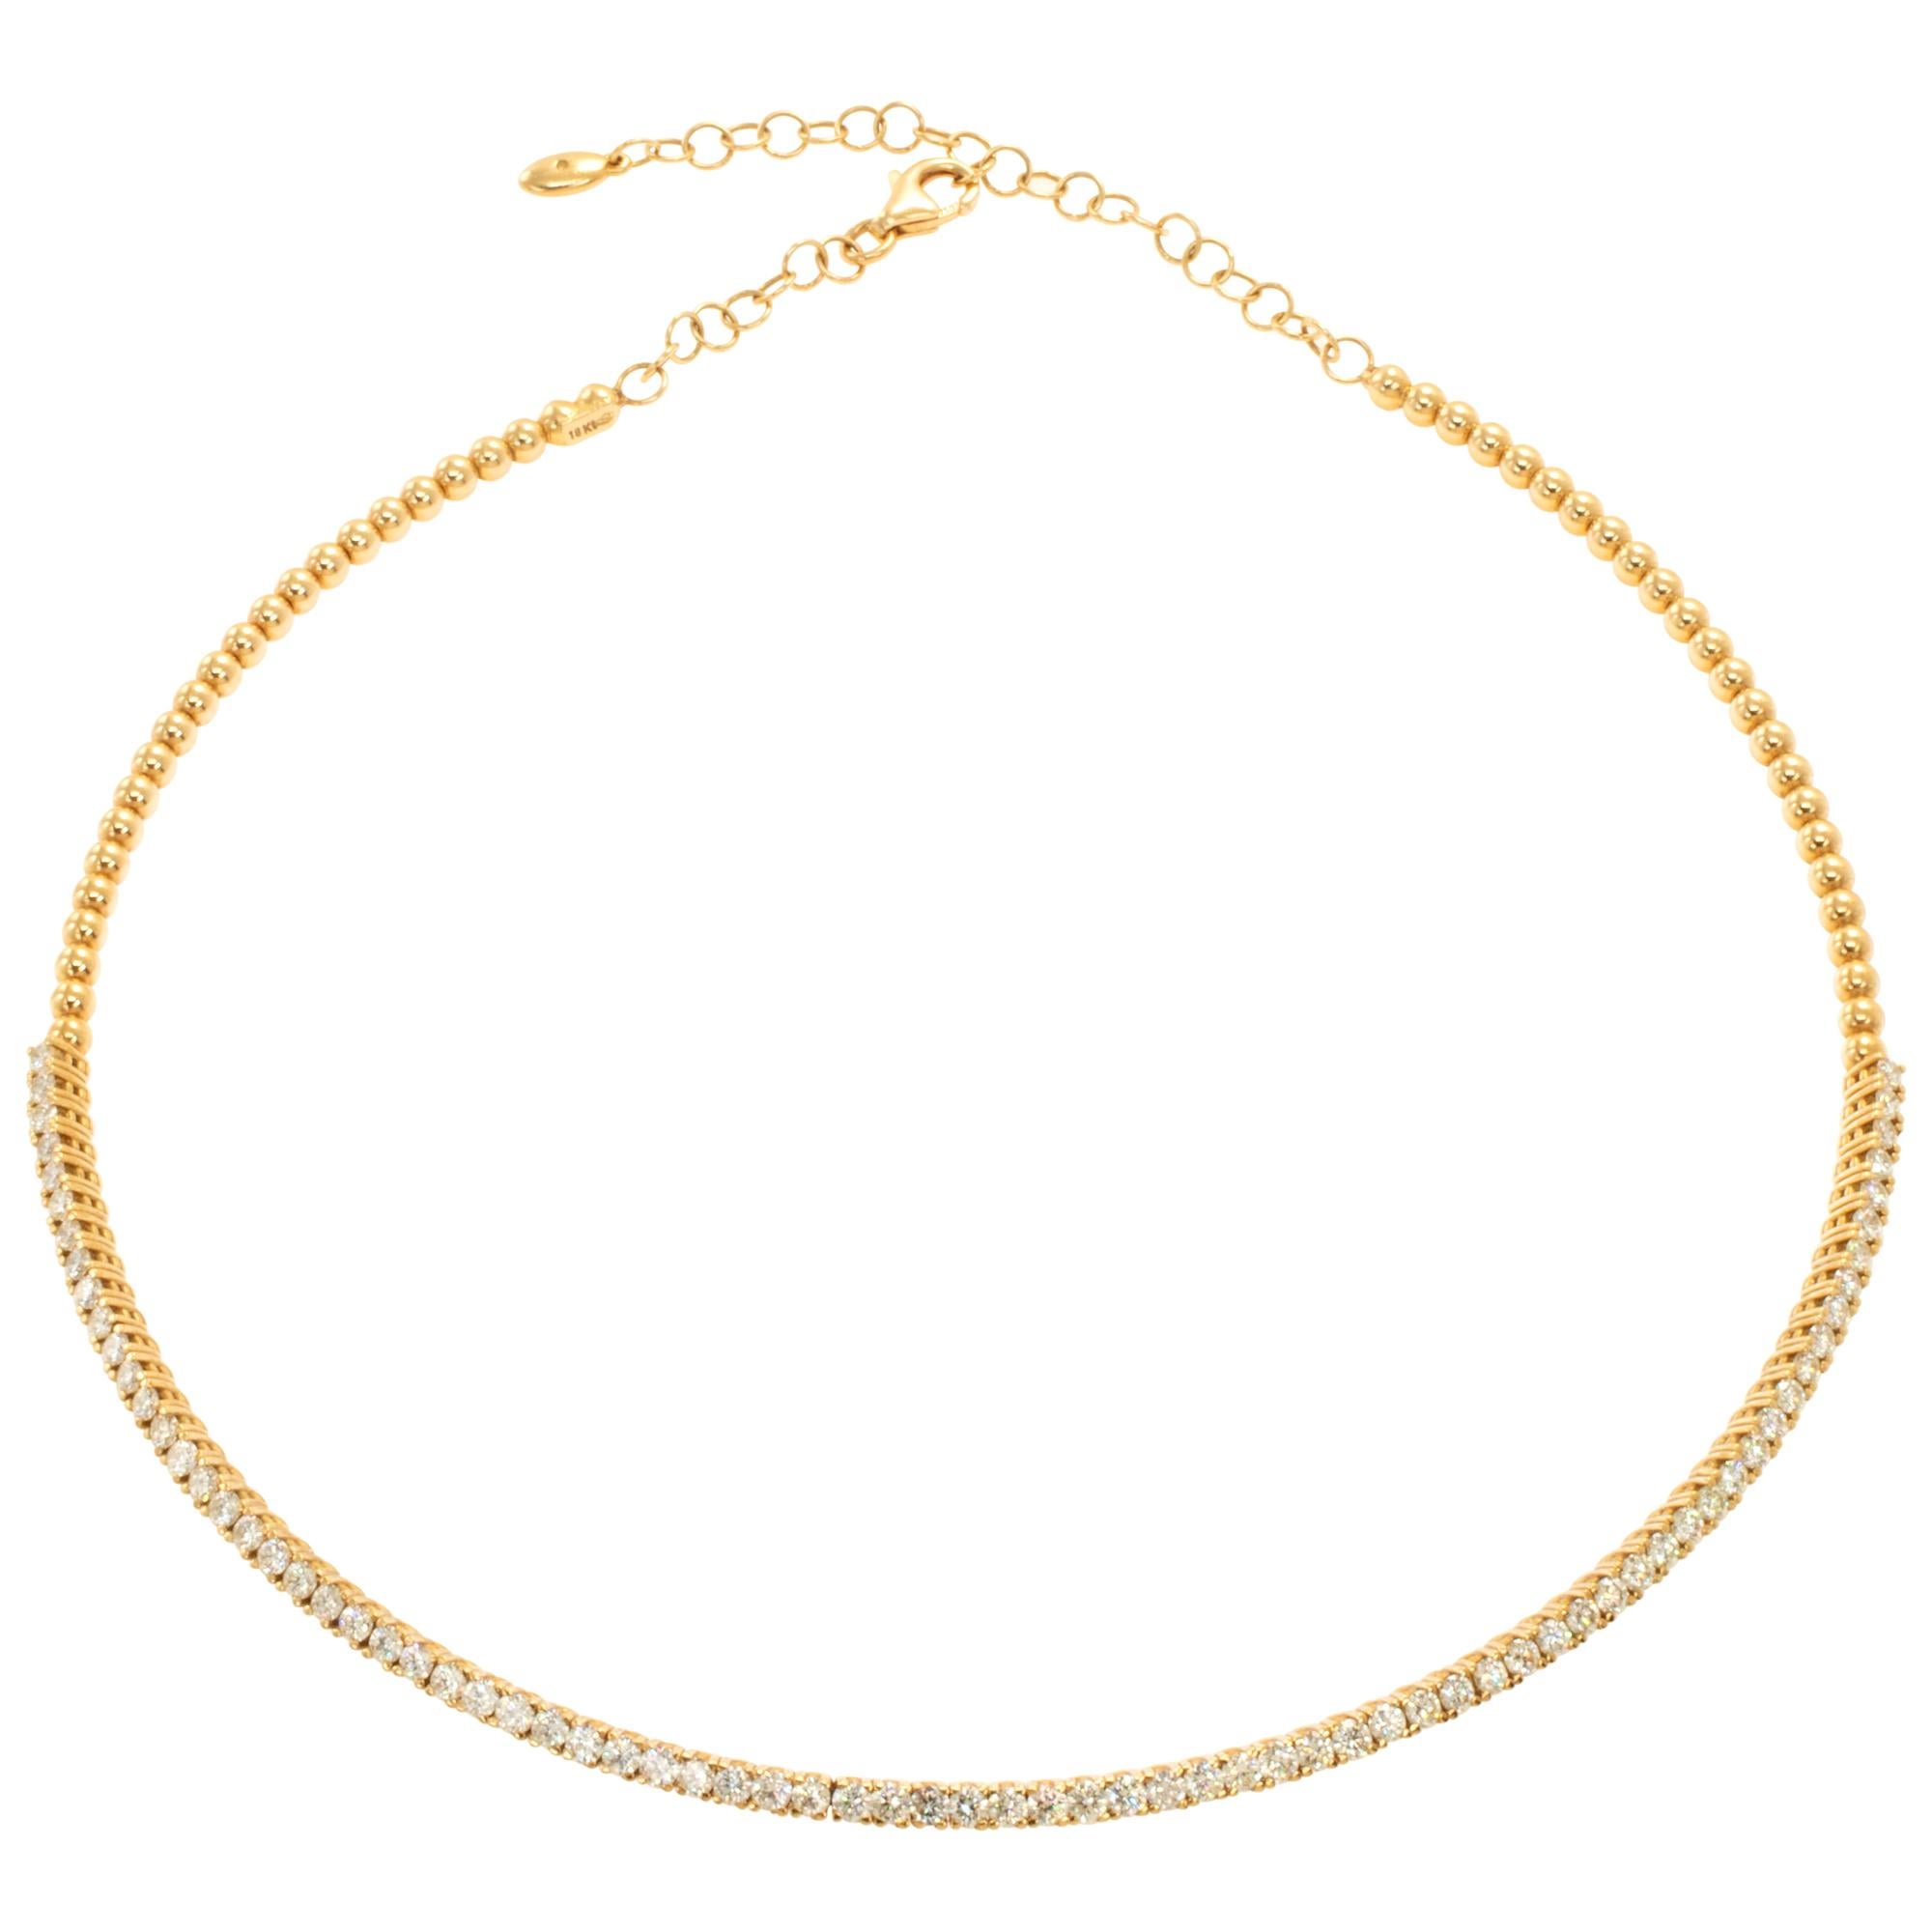 Diamond 18k yellow gold choker necklace In Excellent Condition For Sale In Surfside, FL